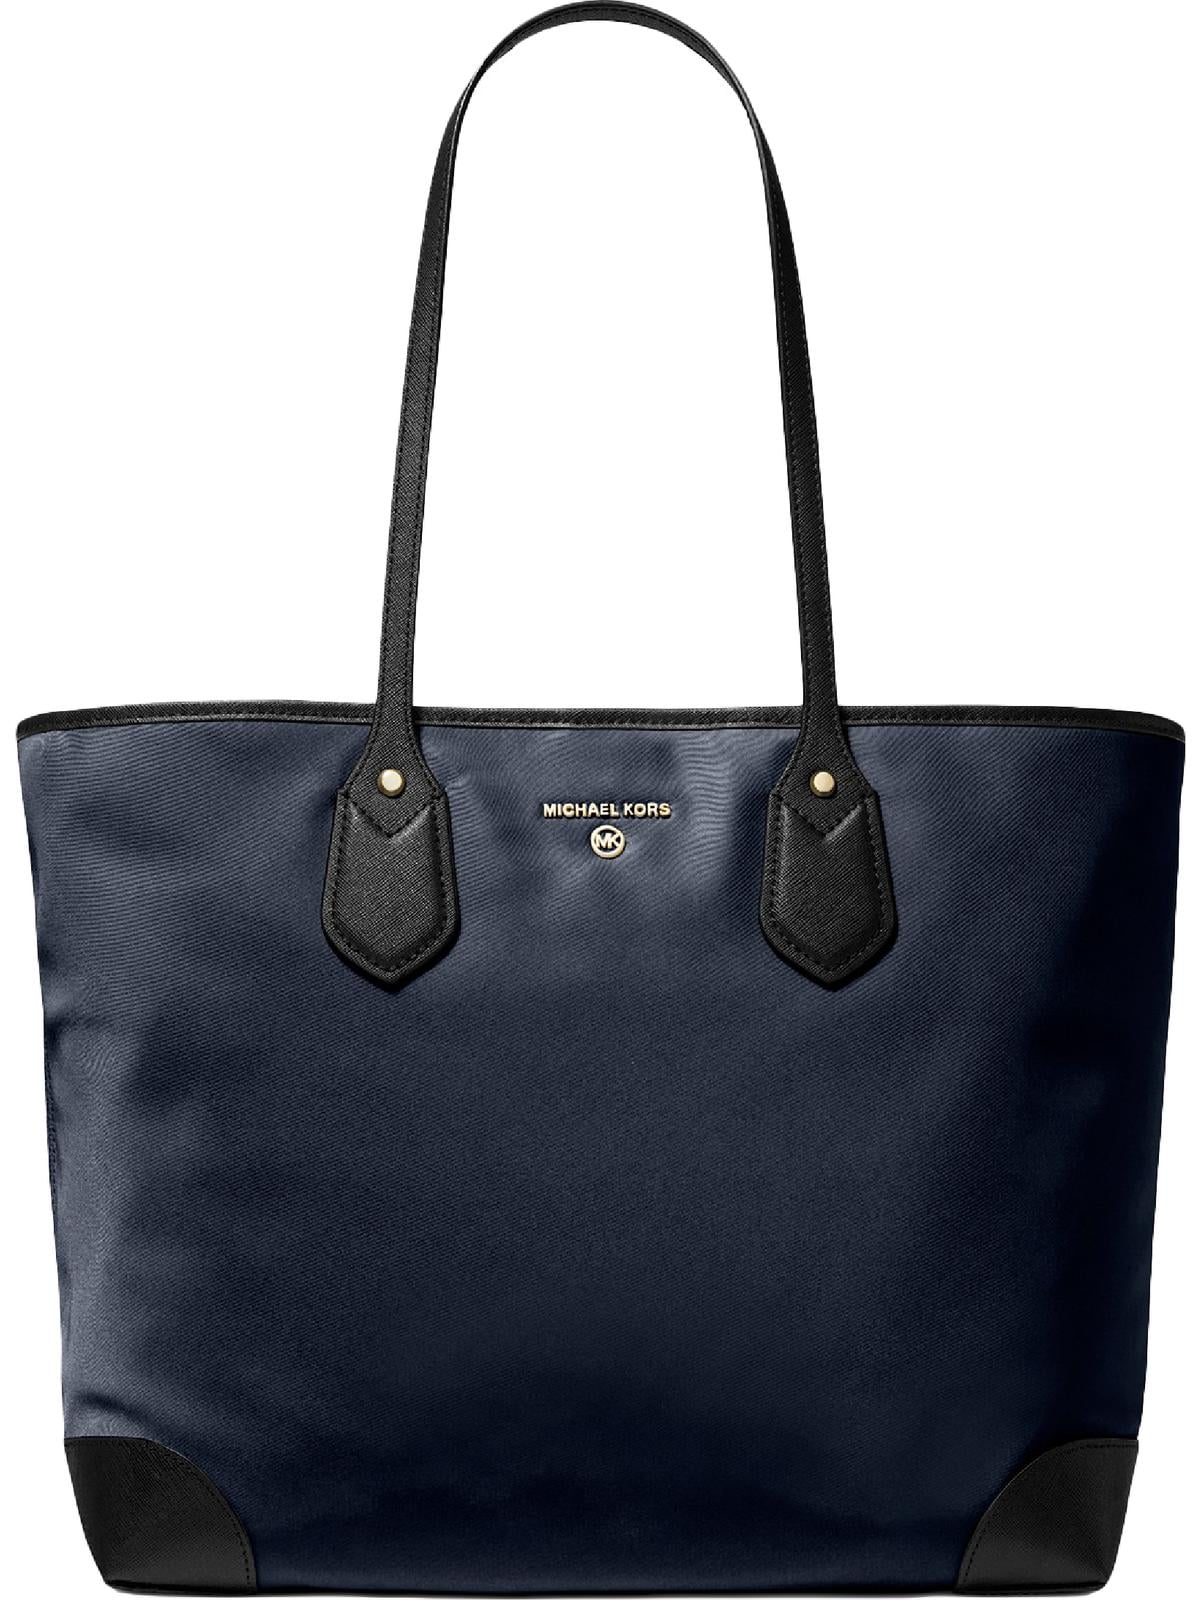 Jet Set Travel Extra-Small Saffiano Leather Top-Zip Tote Bag | Michael Kors